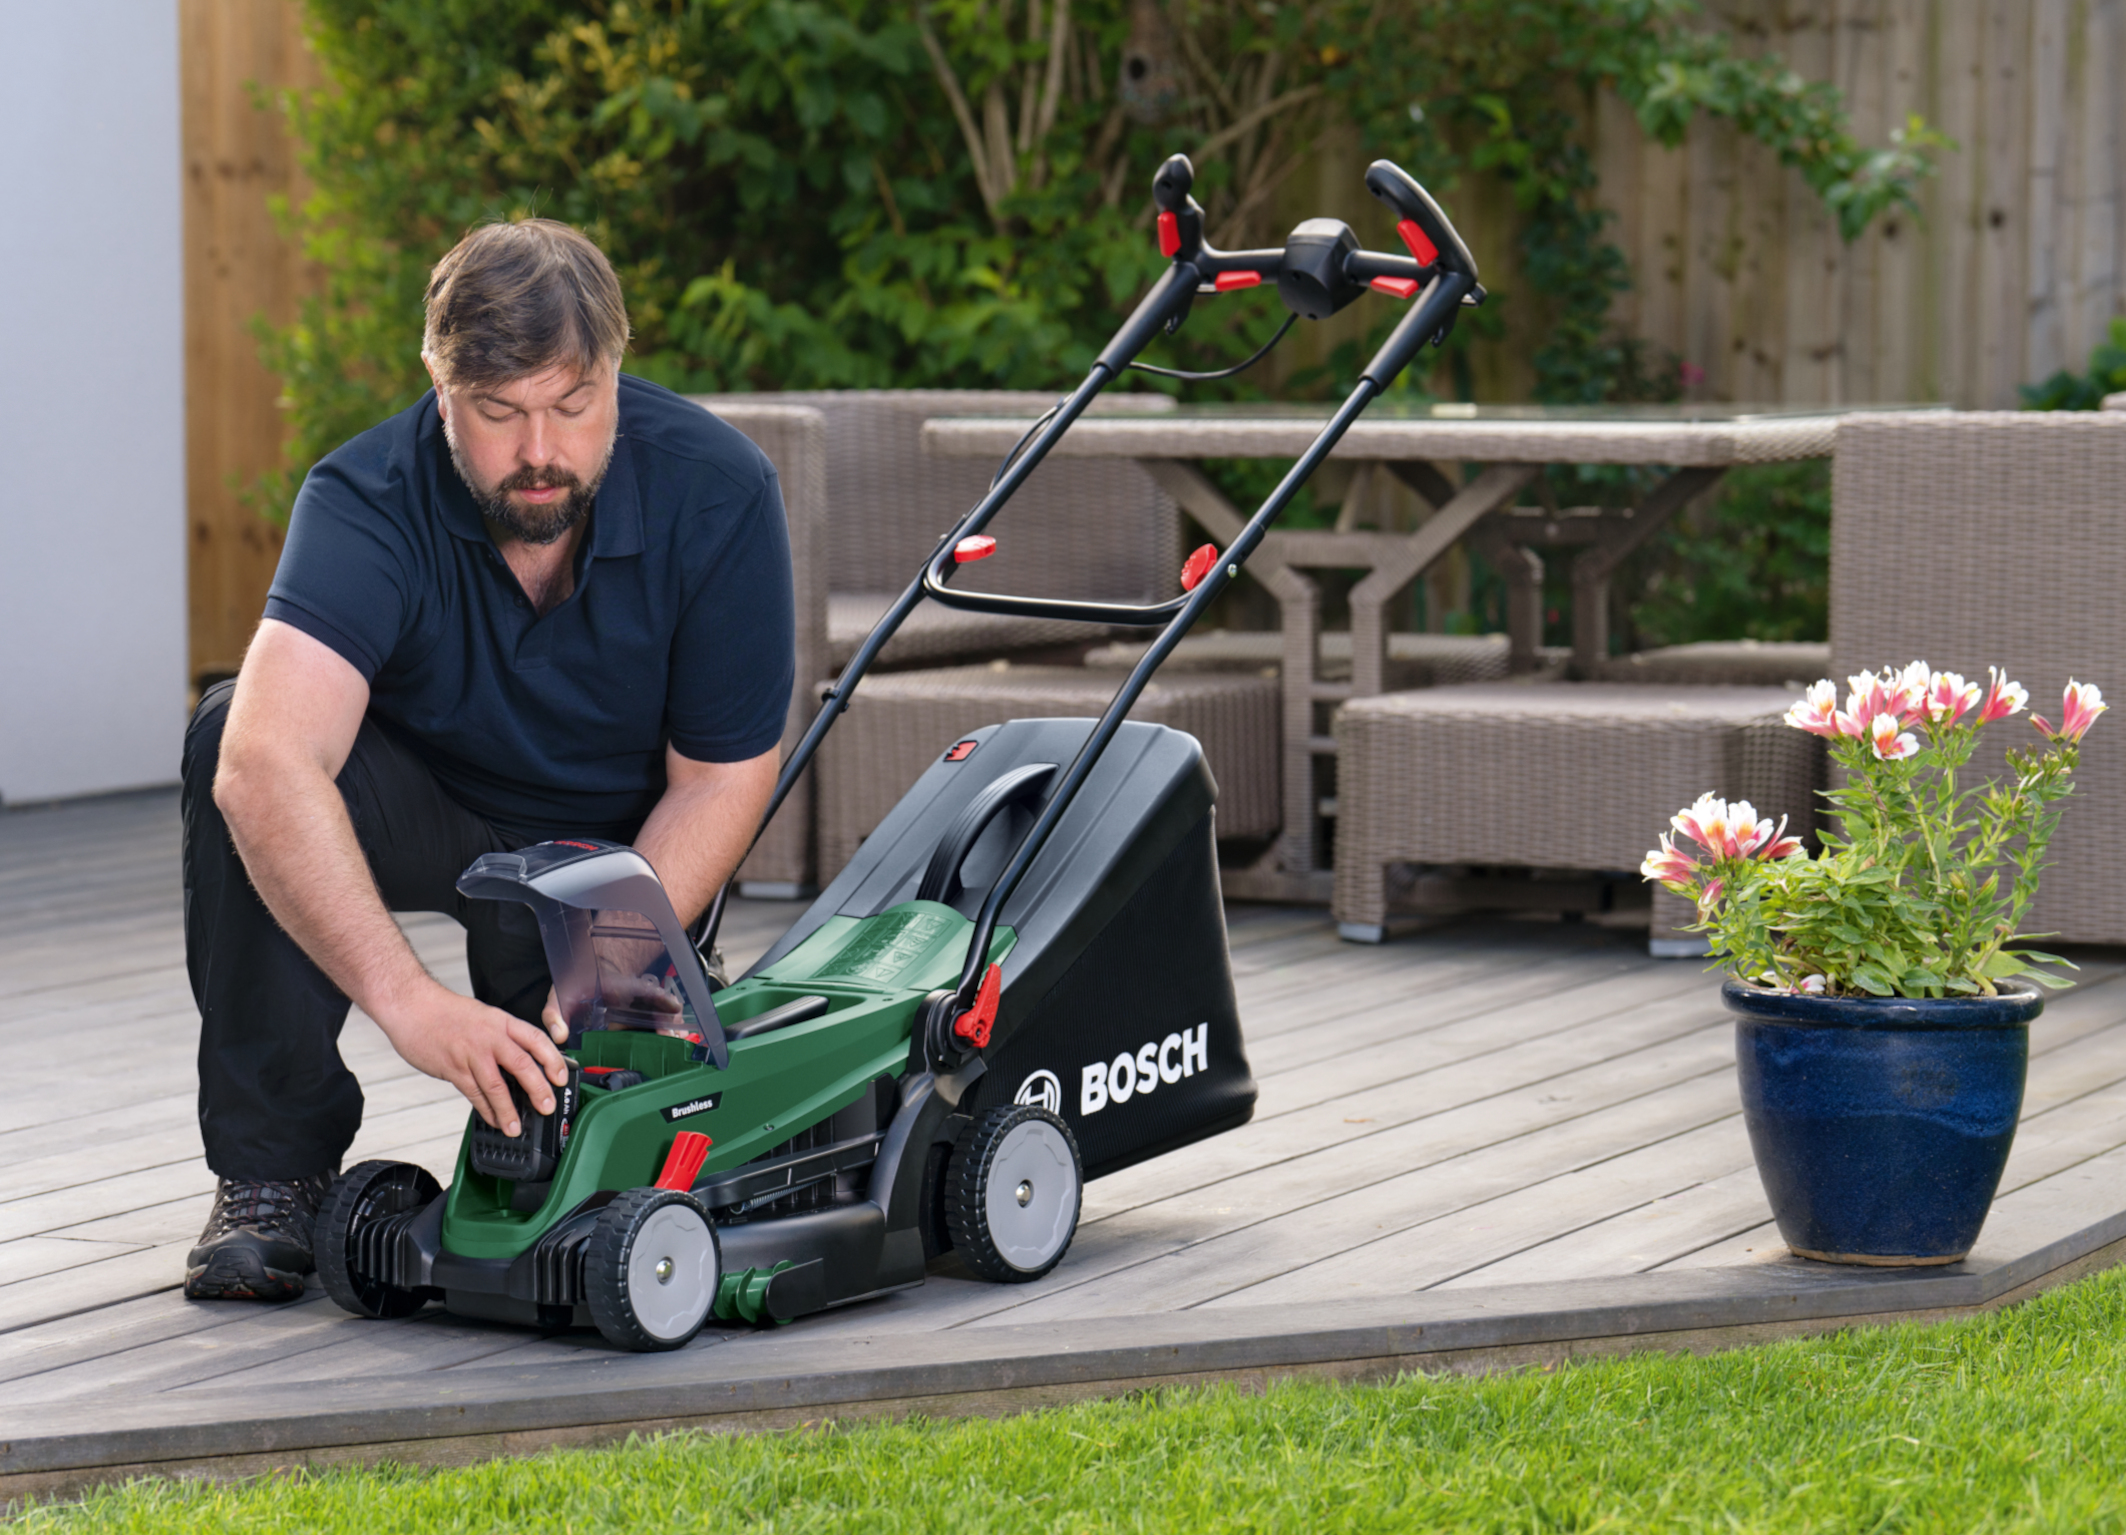 Brushless motor for high performance and longer lifetime: First cordless lawnmower from Bosch with two batteries